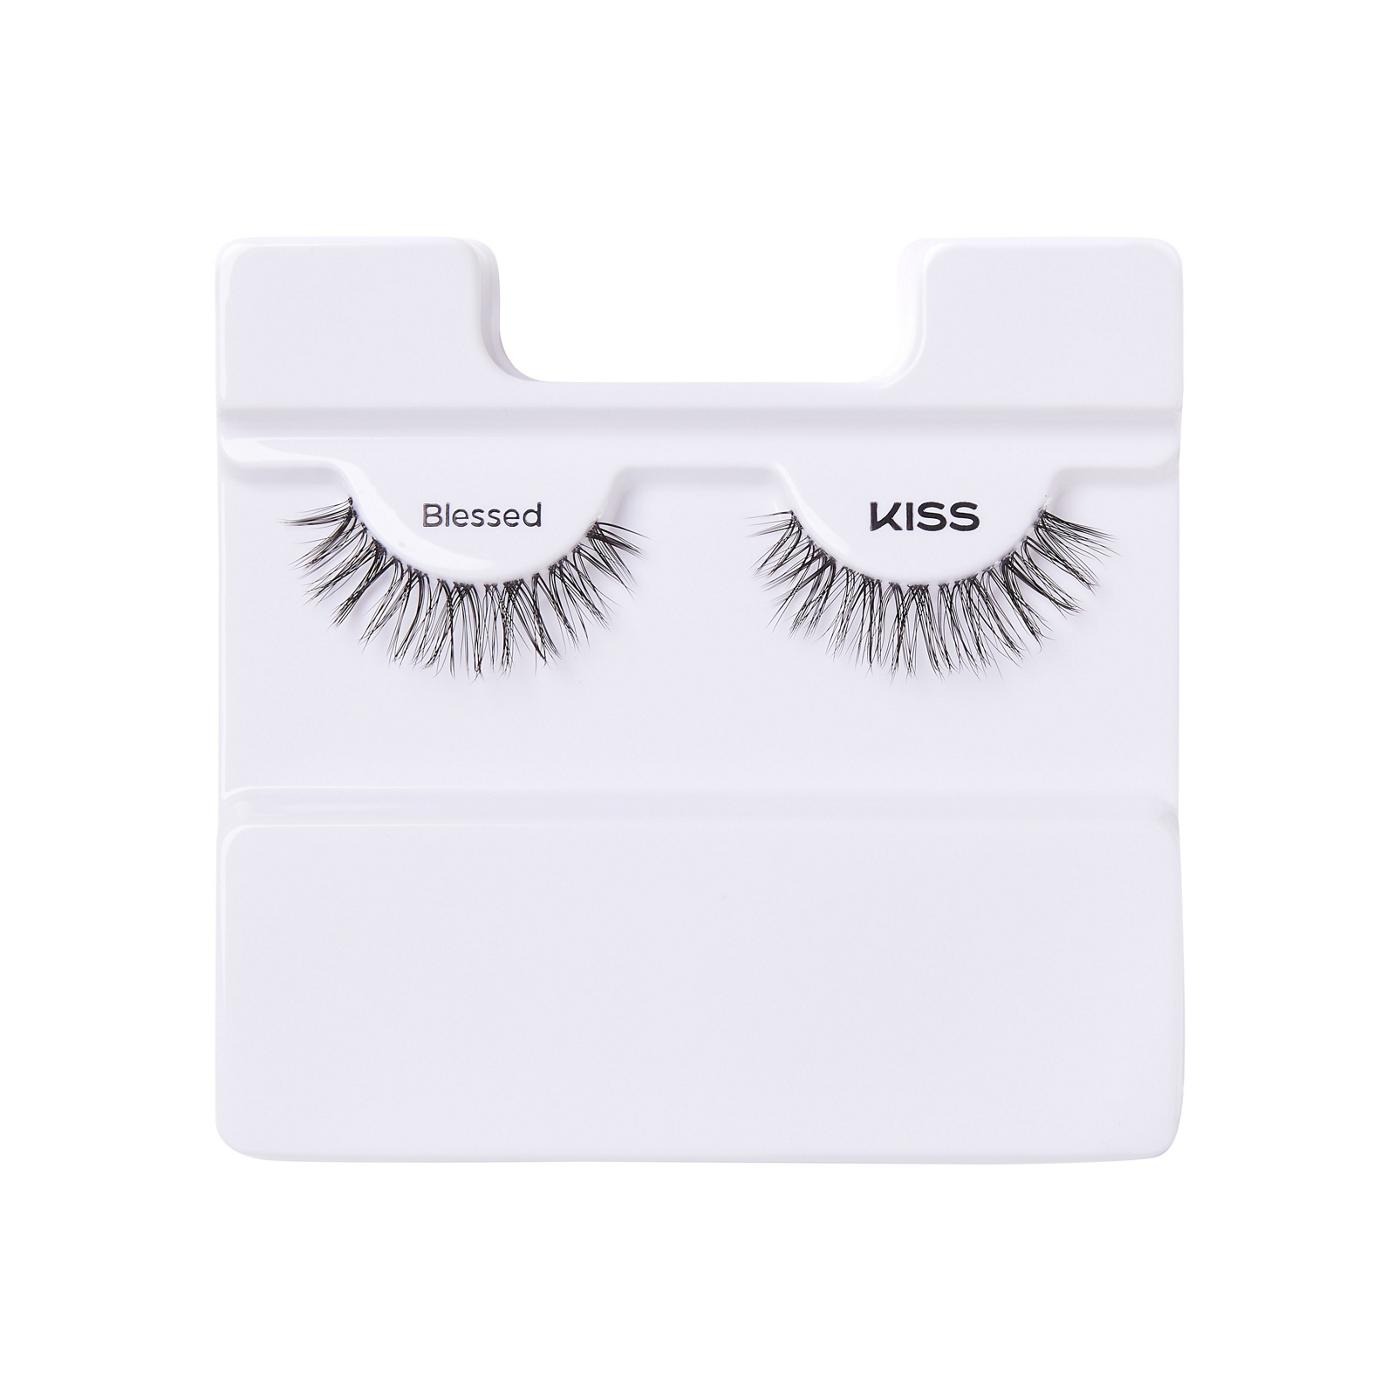 KISS My Lash But Better Lashes - Blessed; image 6 of 7